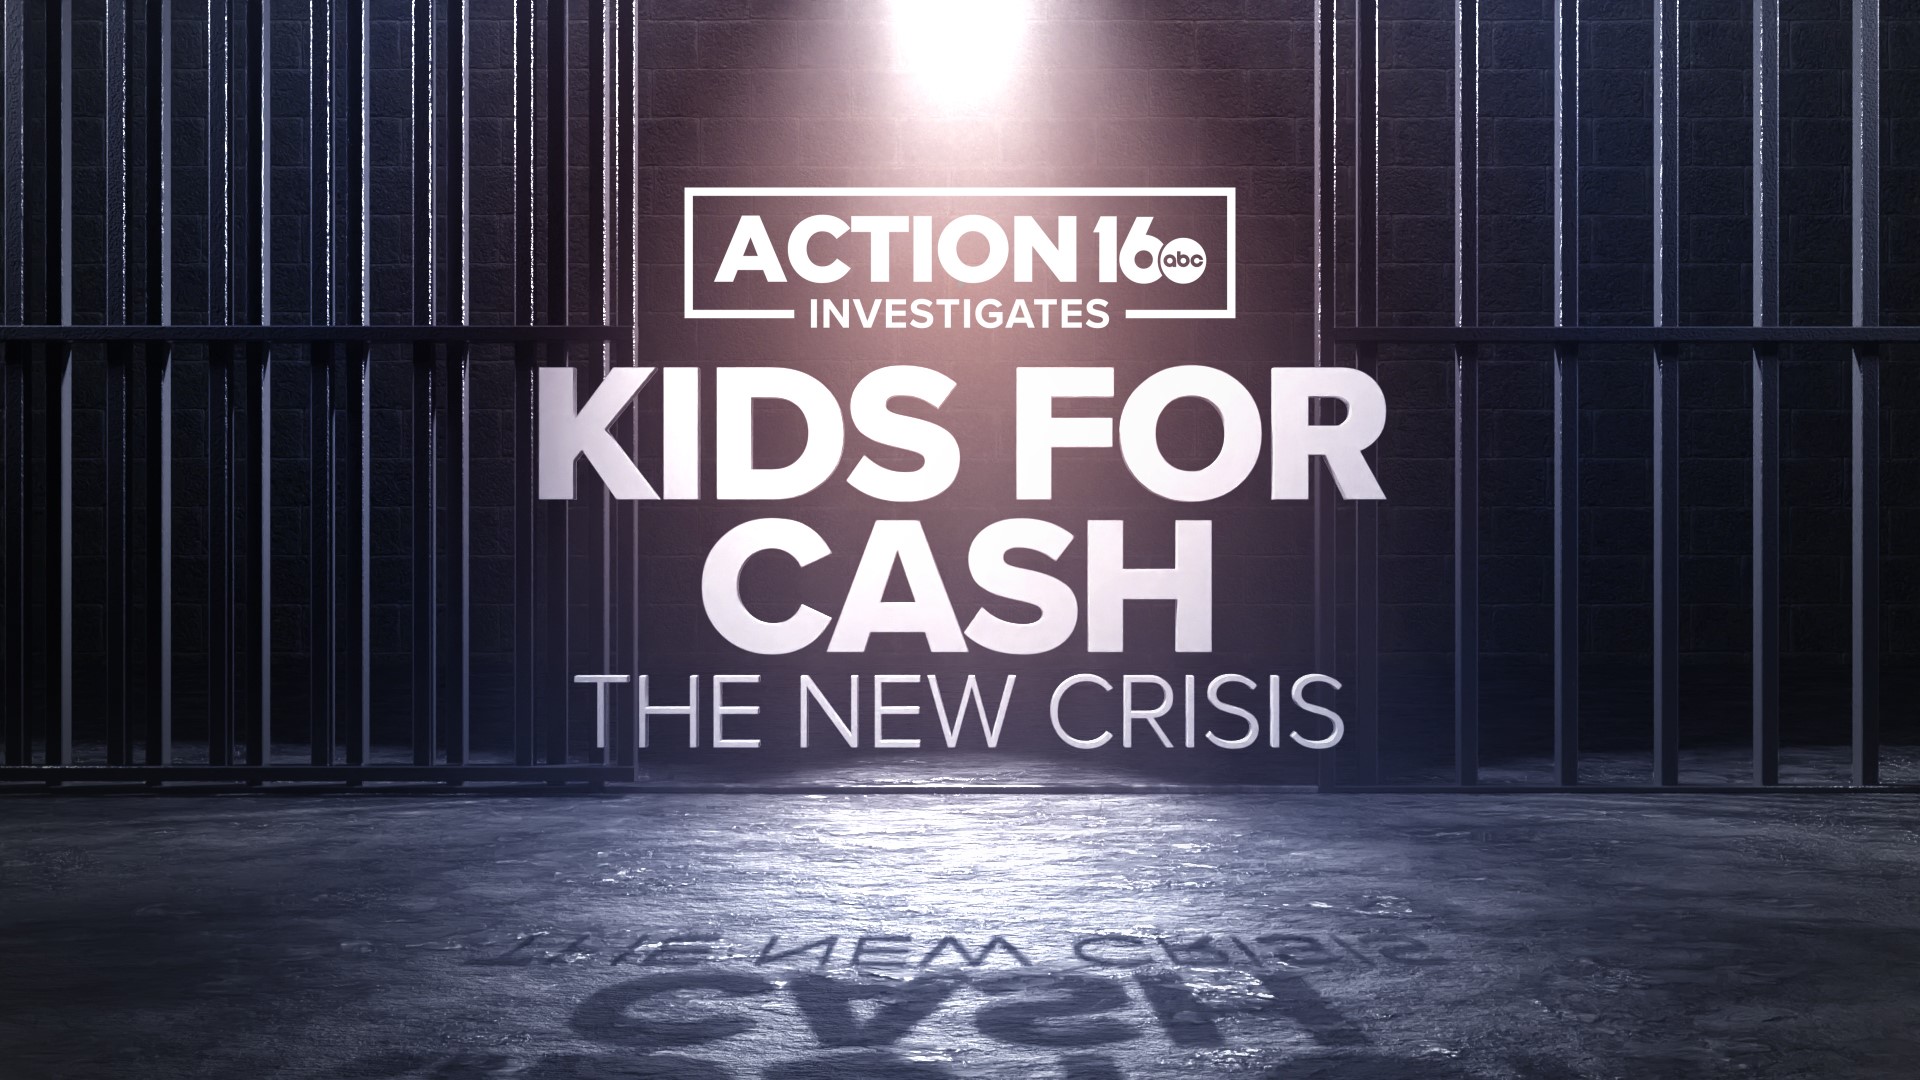 15 years later, the effects of "Kids for Cash" are still being felt, as another crisis unfolds within the juvenile justice system in Luzerne County and beyond.